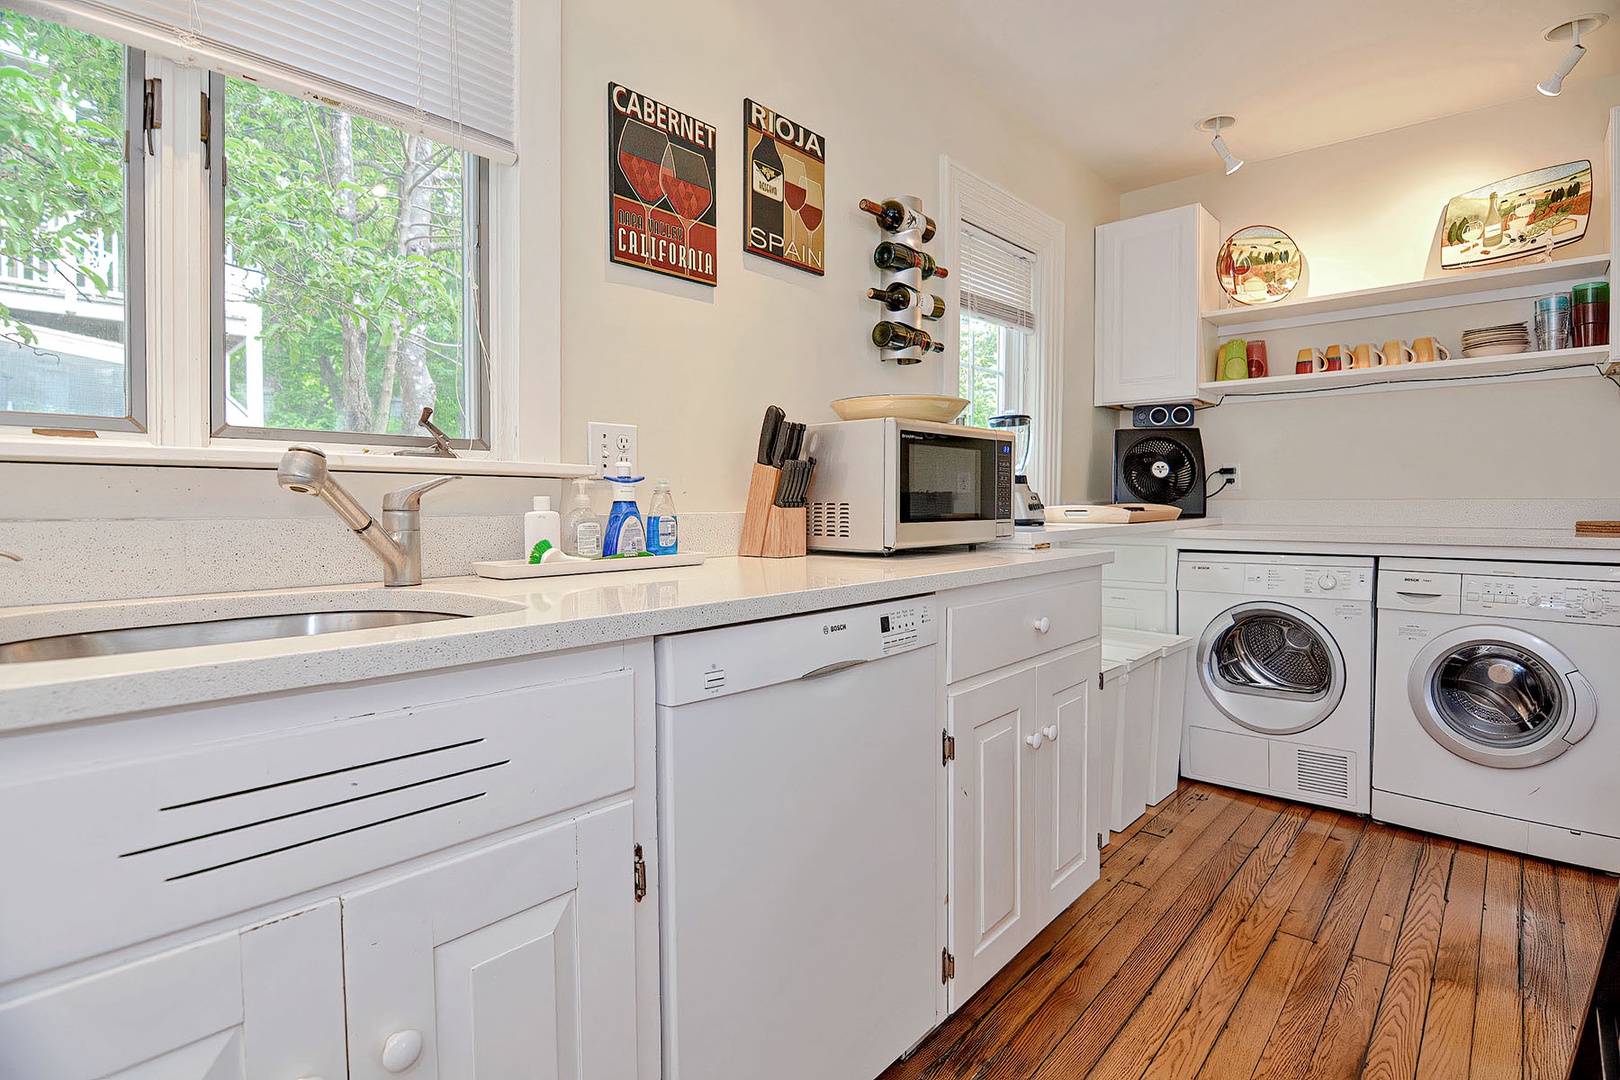 The laundry machines are also in the kitchen.